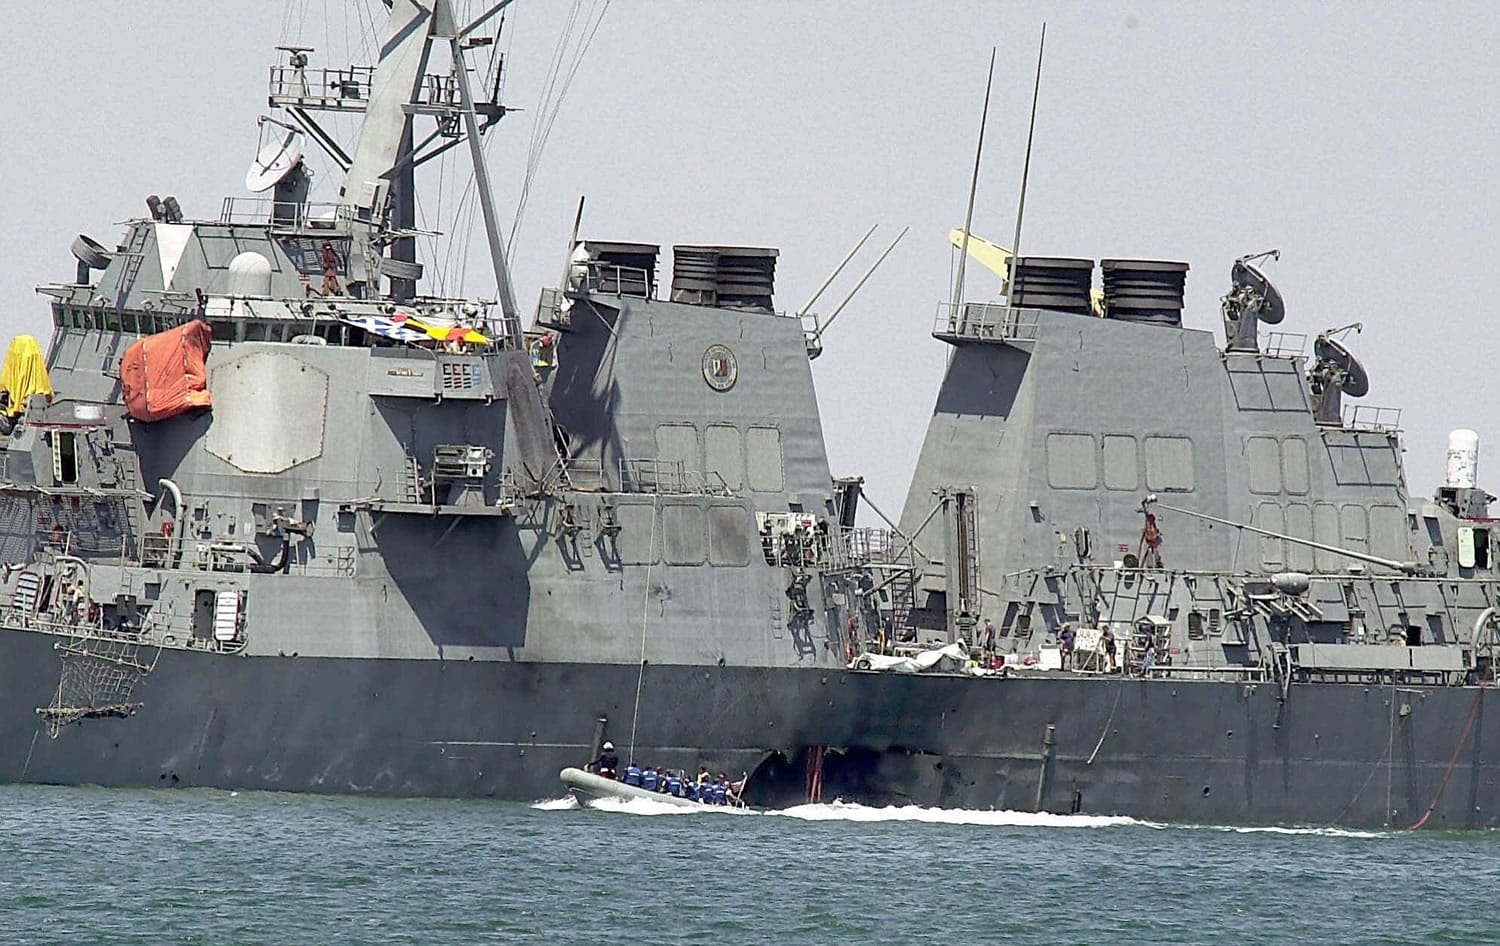 Investigators in a speed boat examine the hull of the USS Cole at the Yemeni port of Aden, after a powerful explosion  ripped a hole in the U.S Navy destroyer in 2000.